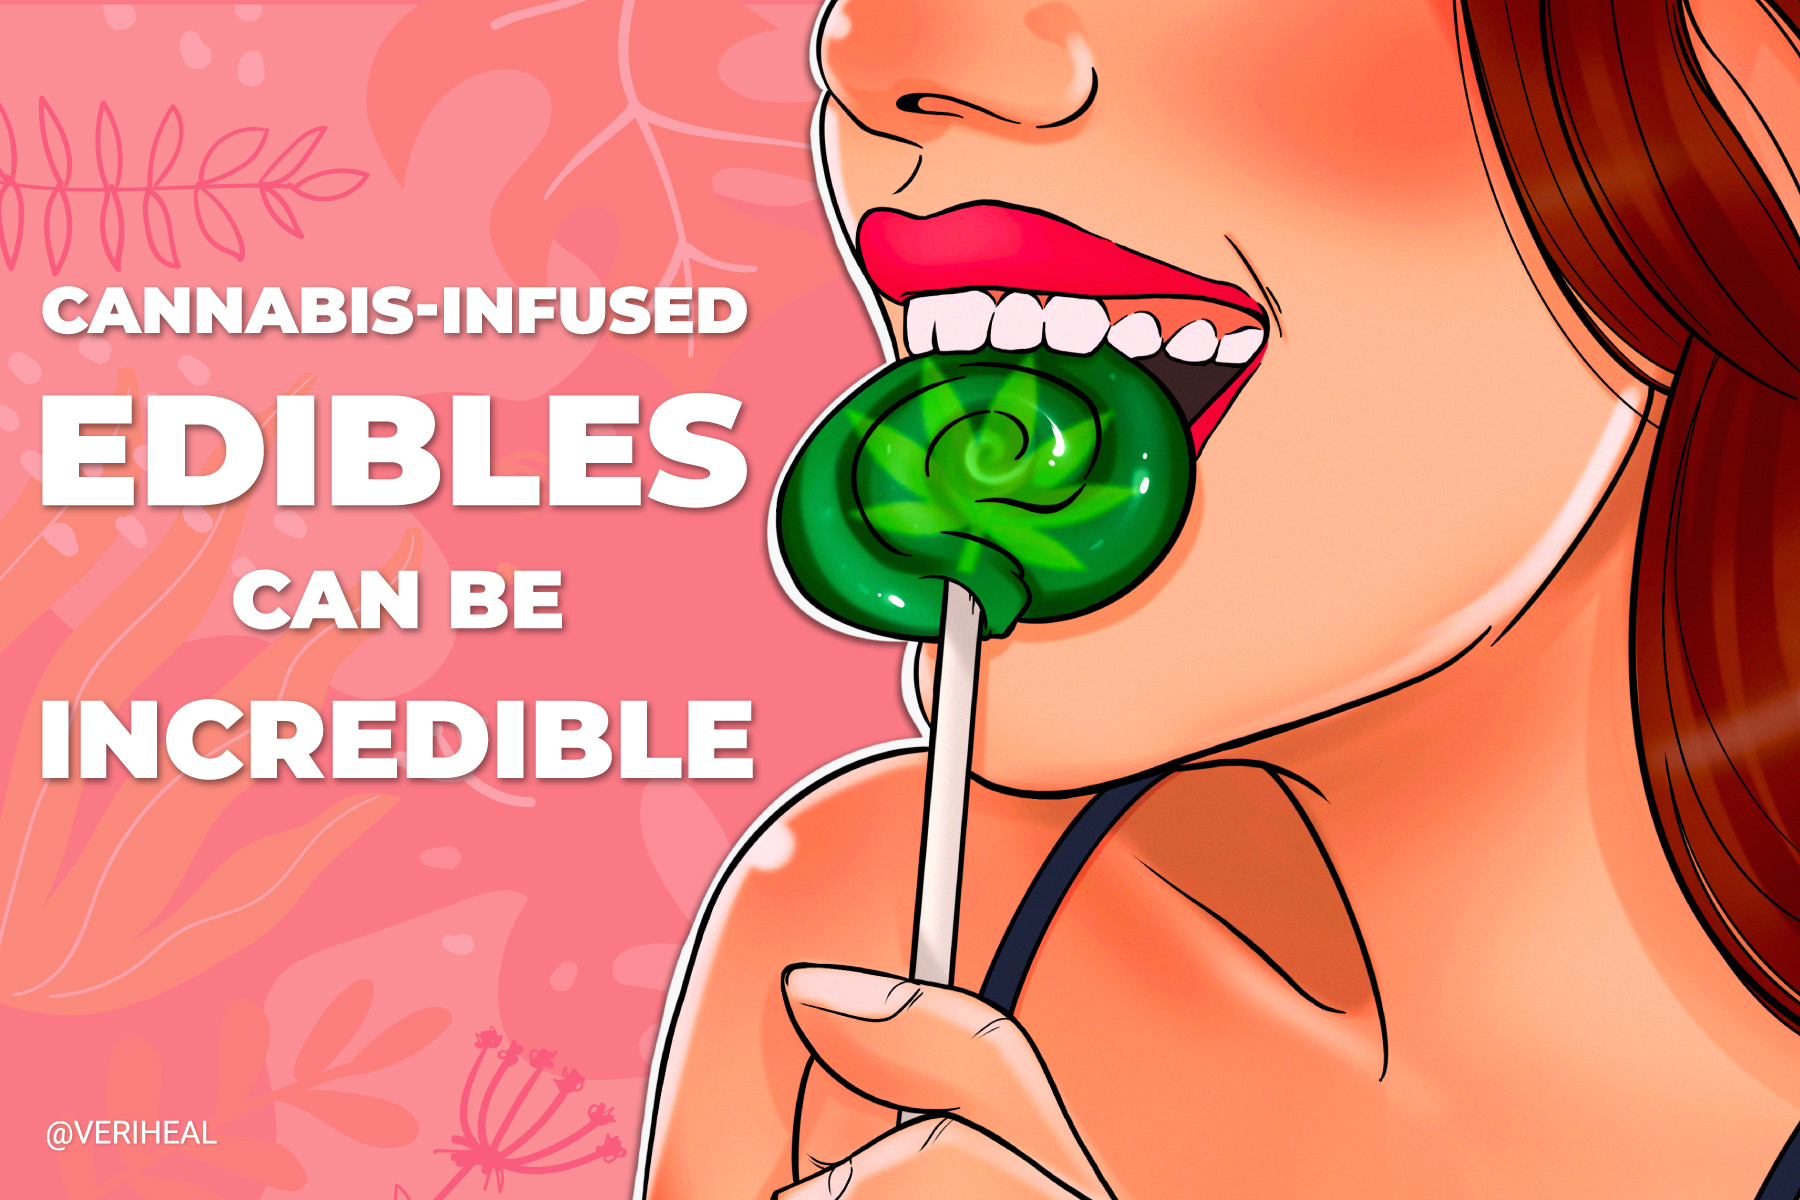 Why Cannabis-Infused Edibles Can Be Incredible